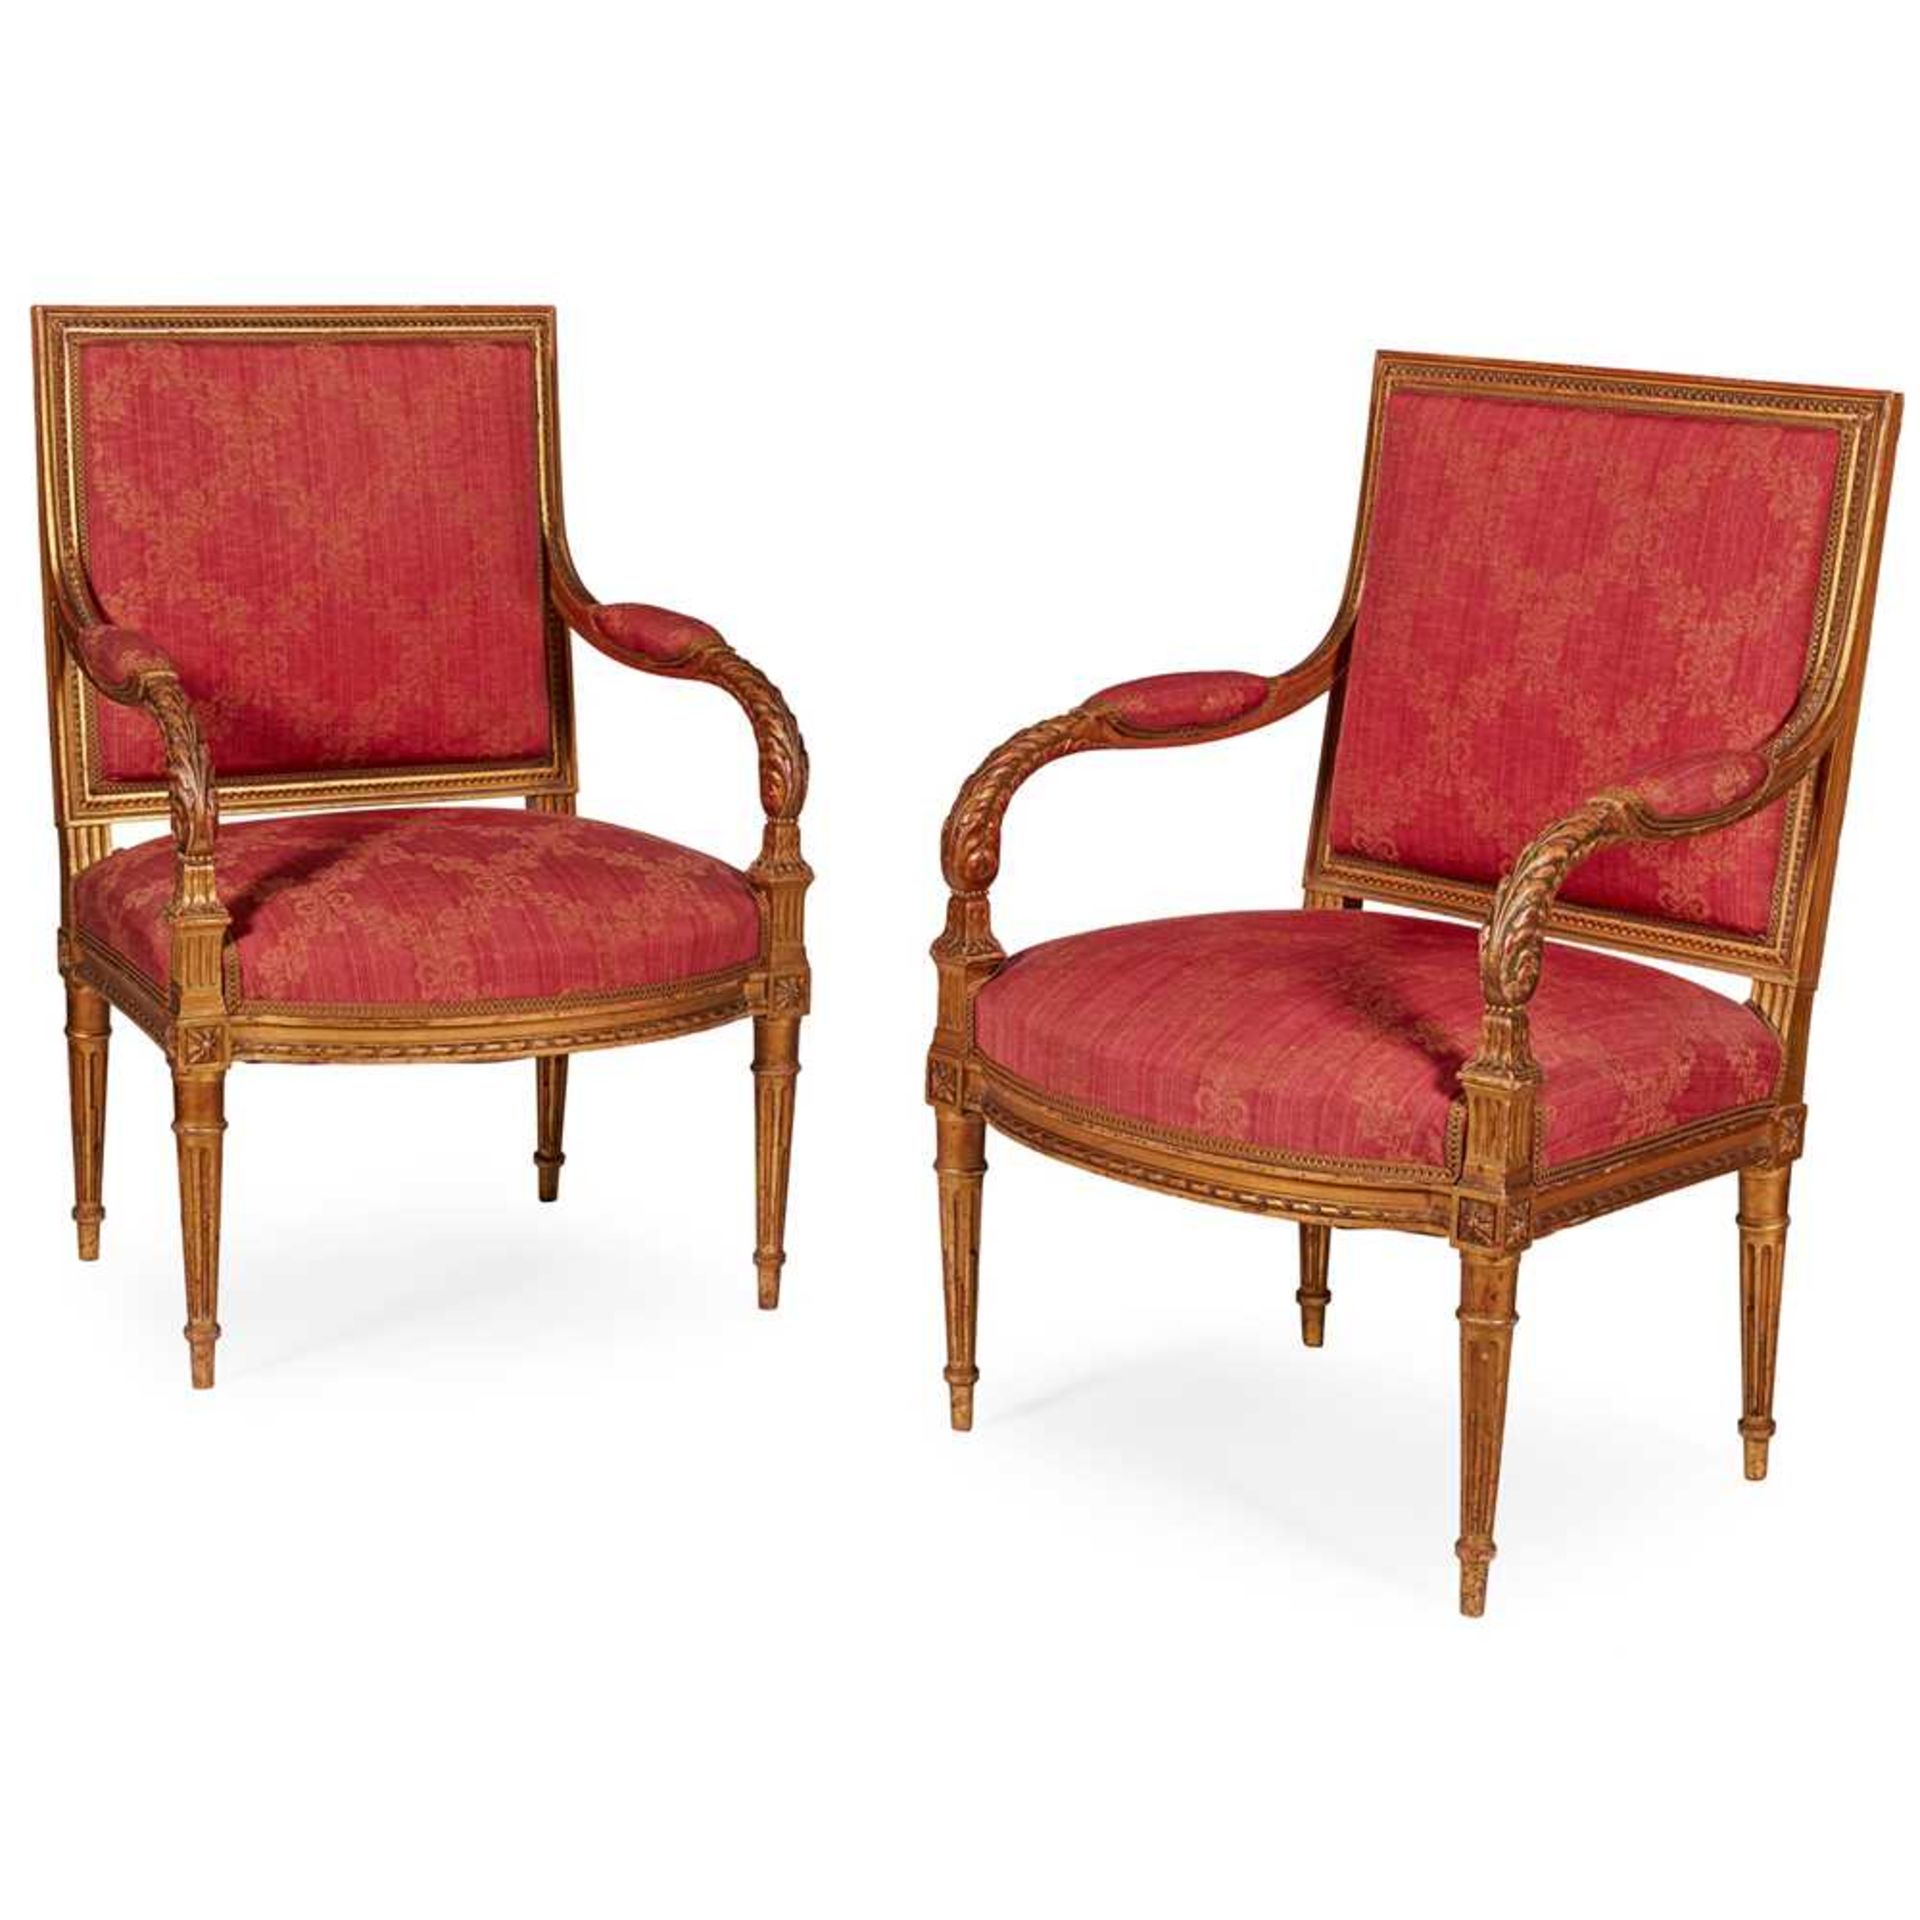 PAIR OF LOUIS XVI STYLE GILTWOOD FAUTEUILS 19TH CENTURY